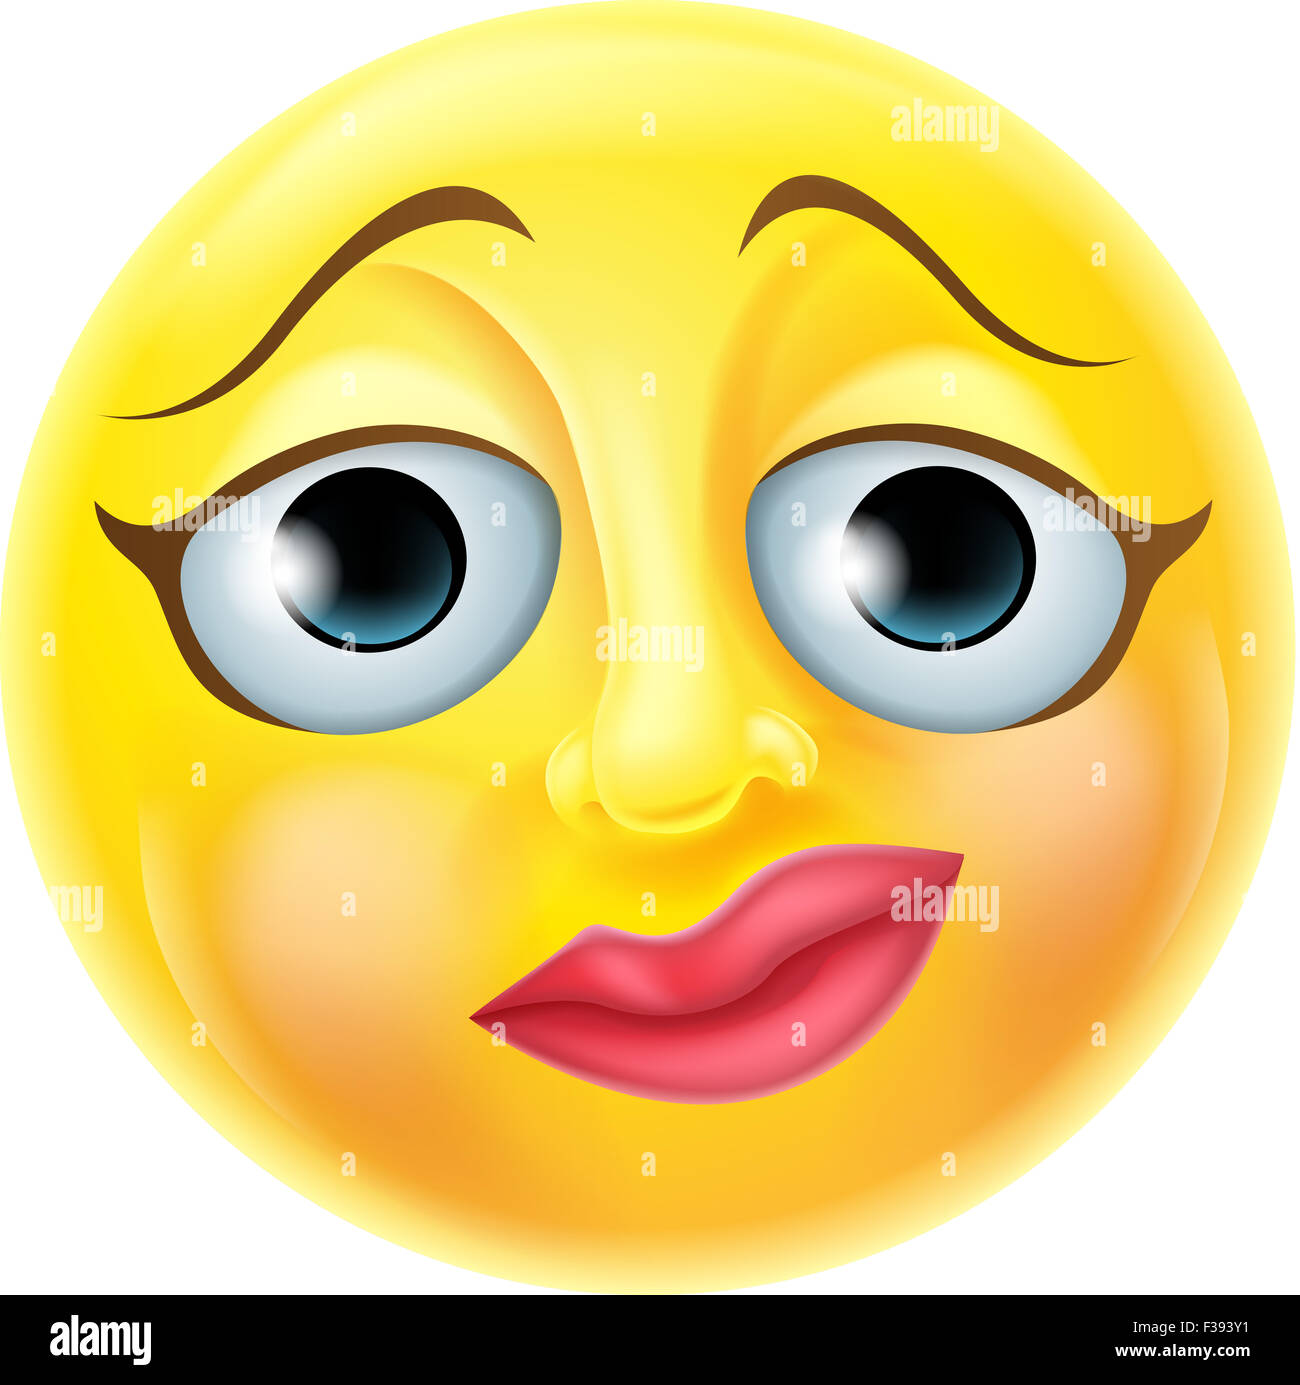 A vervous emoji emoticon smiley face character Stock Photo